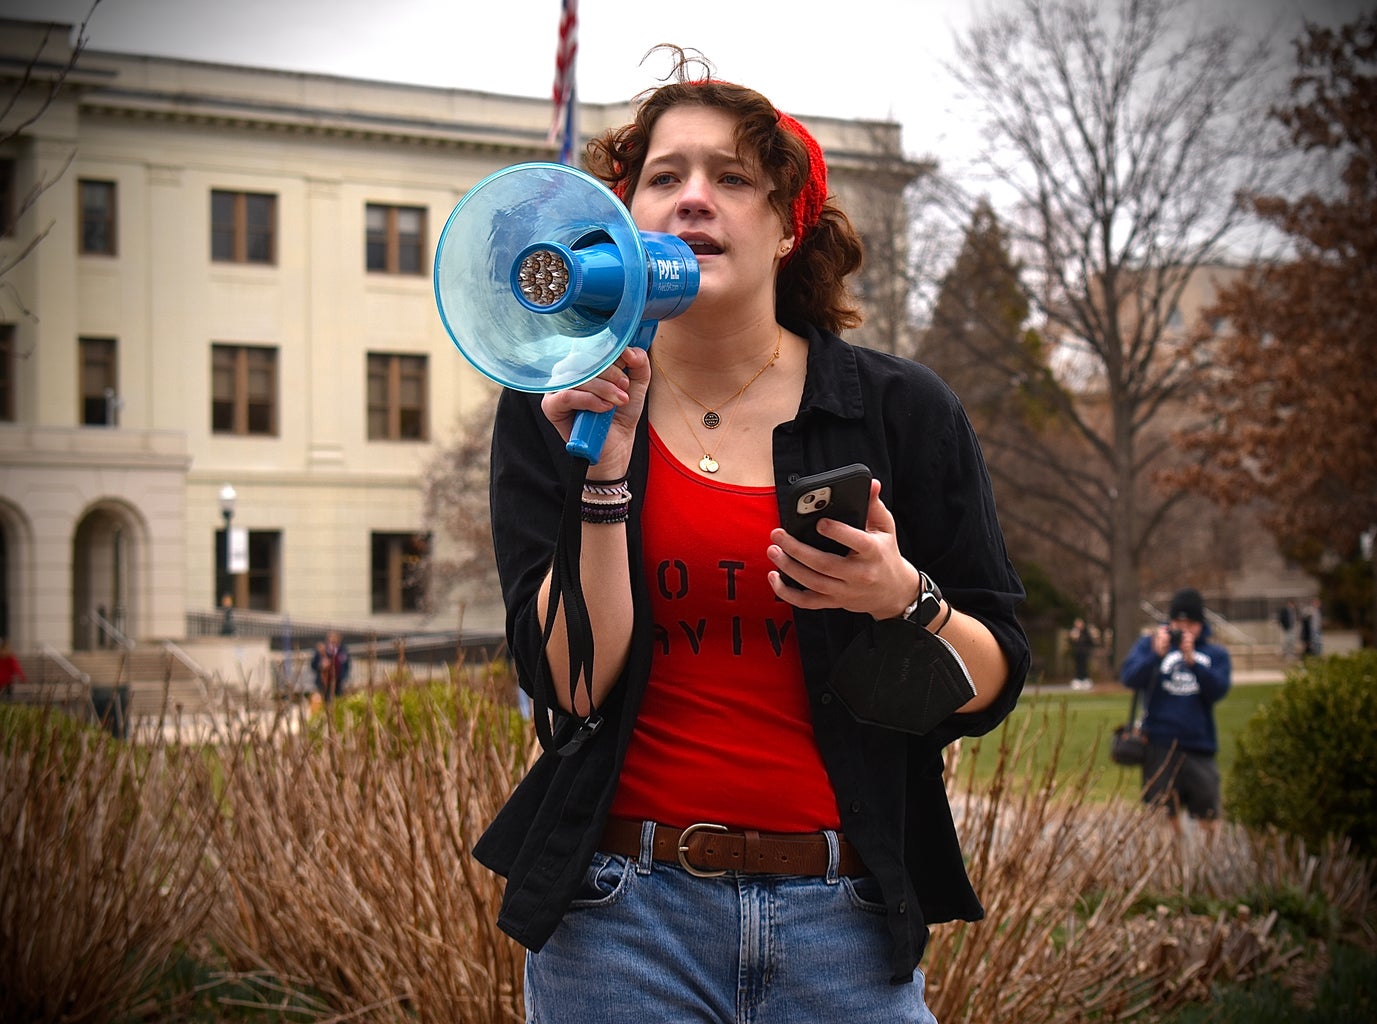 College-aged woman speaking with a bullhorn at a protest.